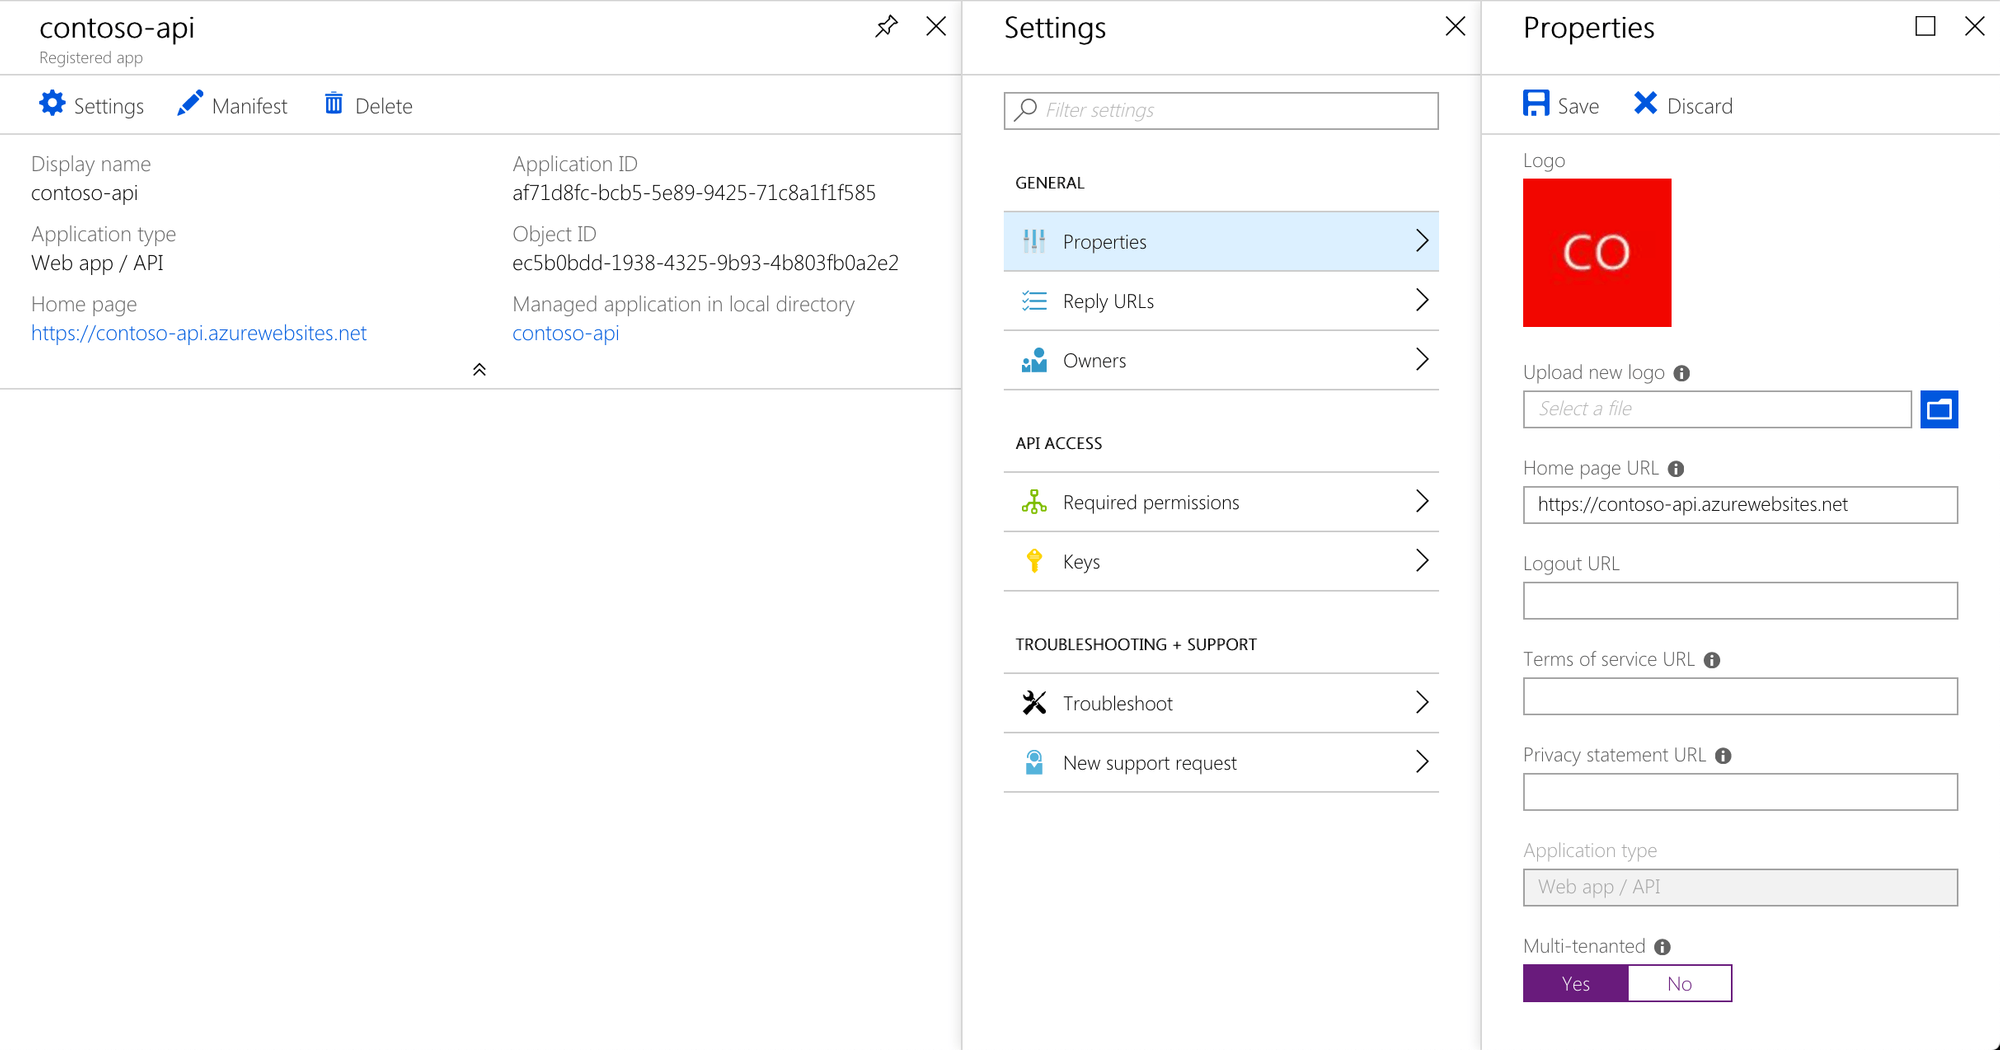 Azure AD application configured to be multi-tenanted